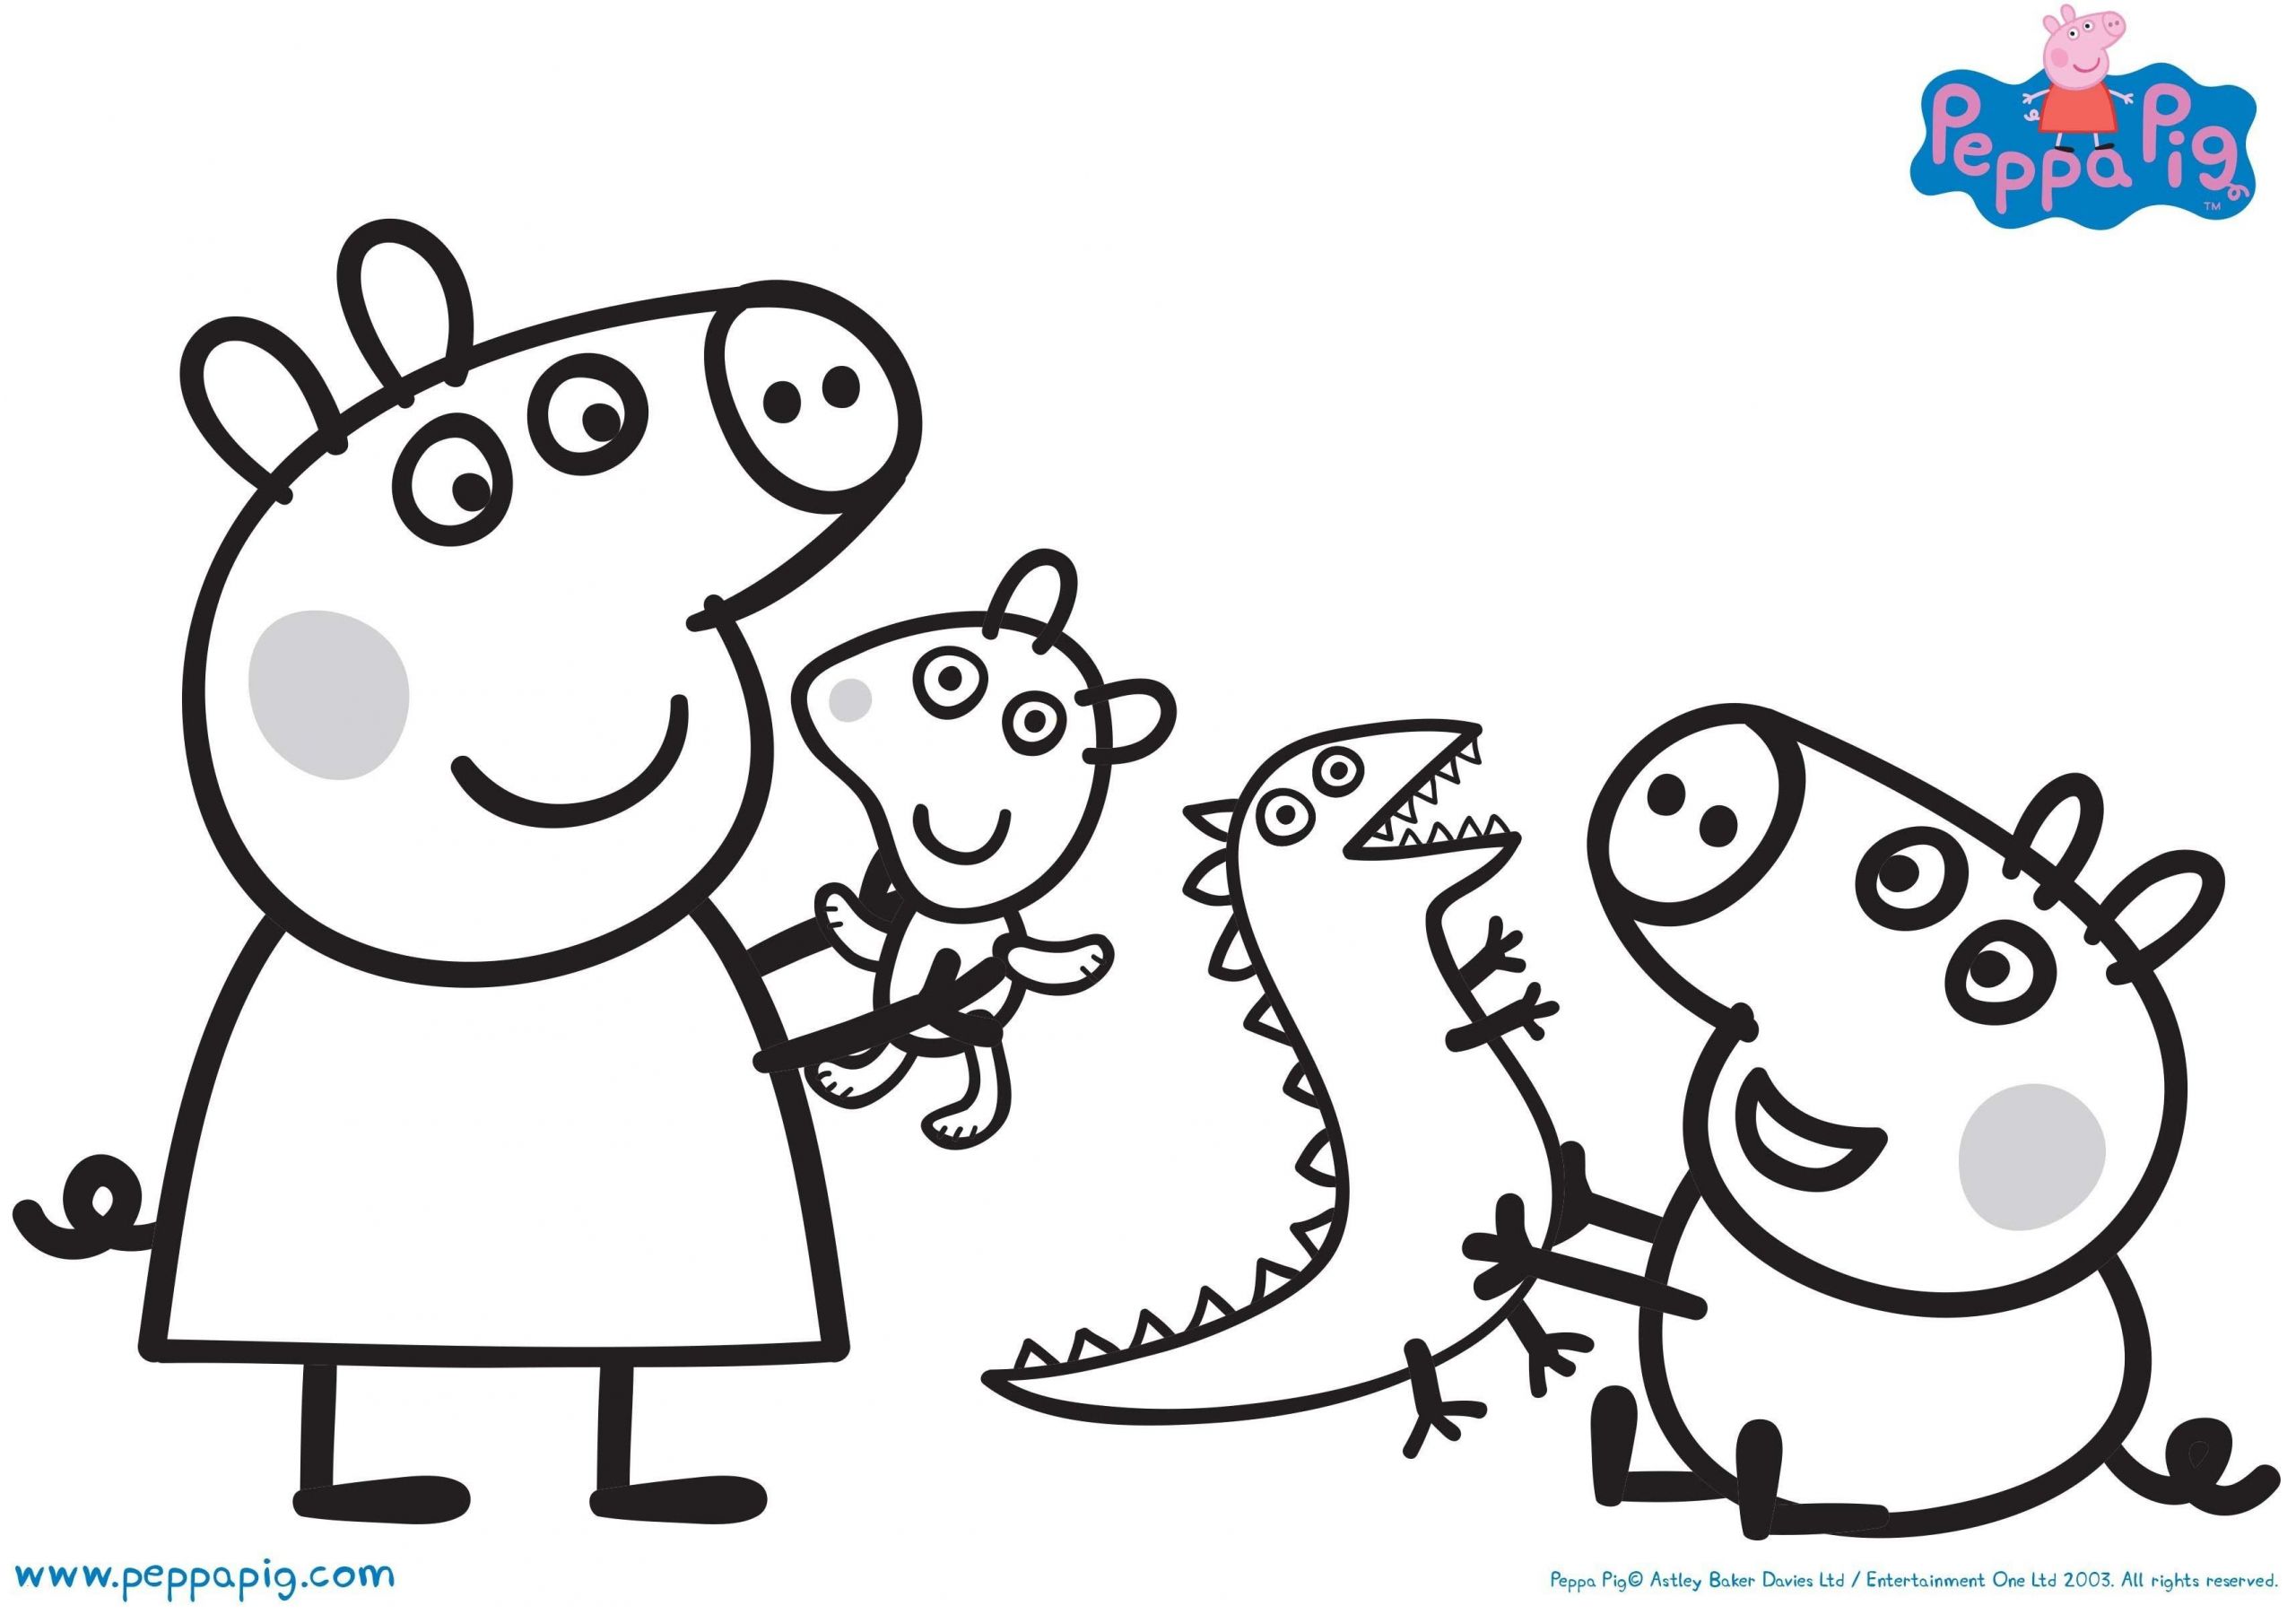 Peppa Pig Coloring Pages For Kids
 Pig Coloring Pages With images